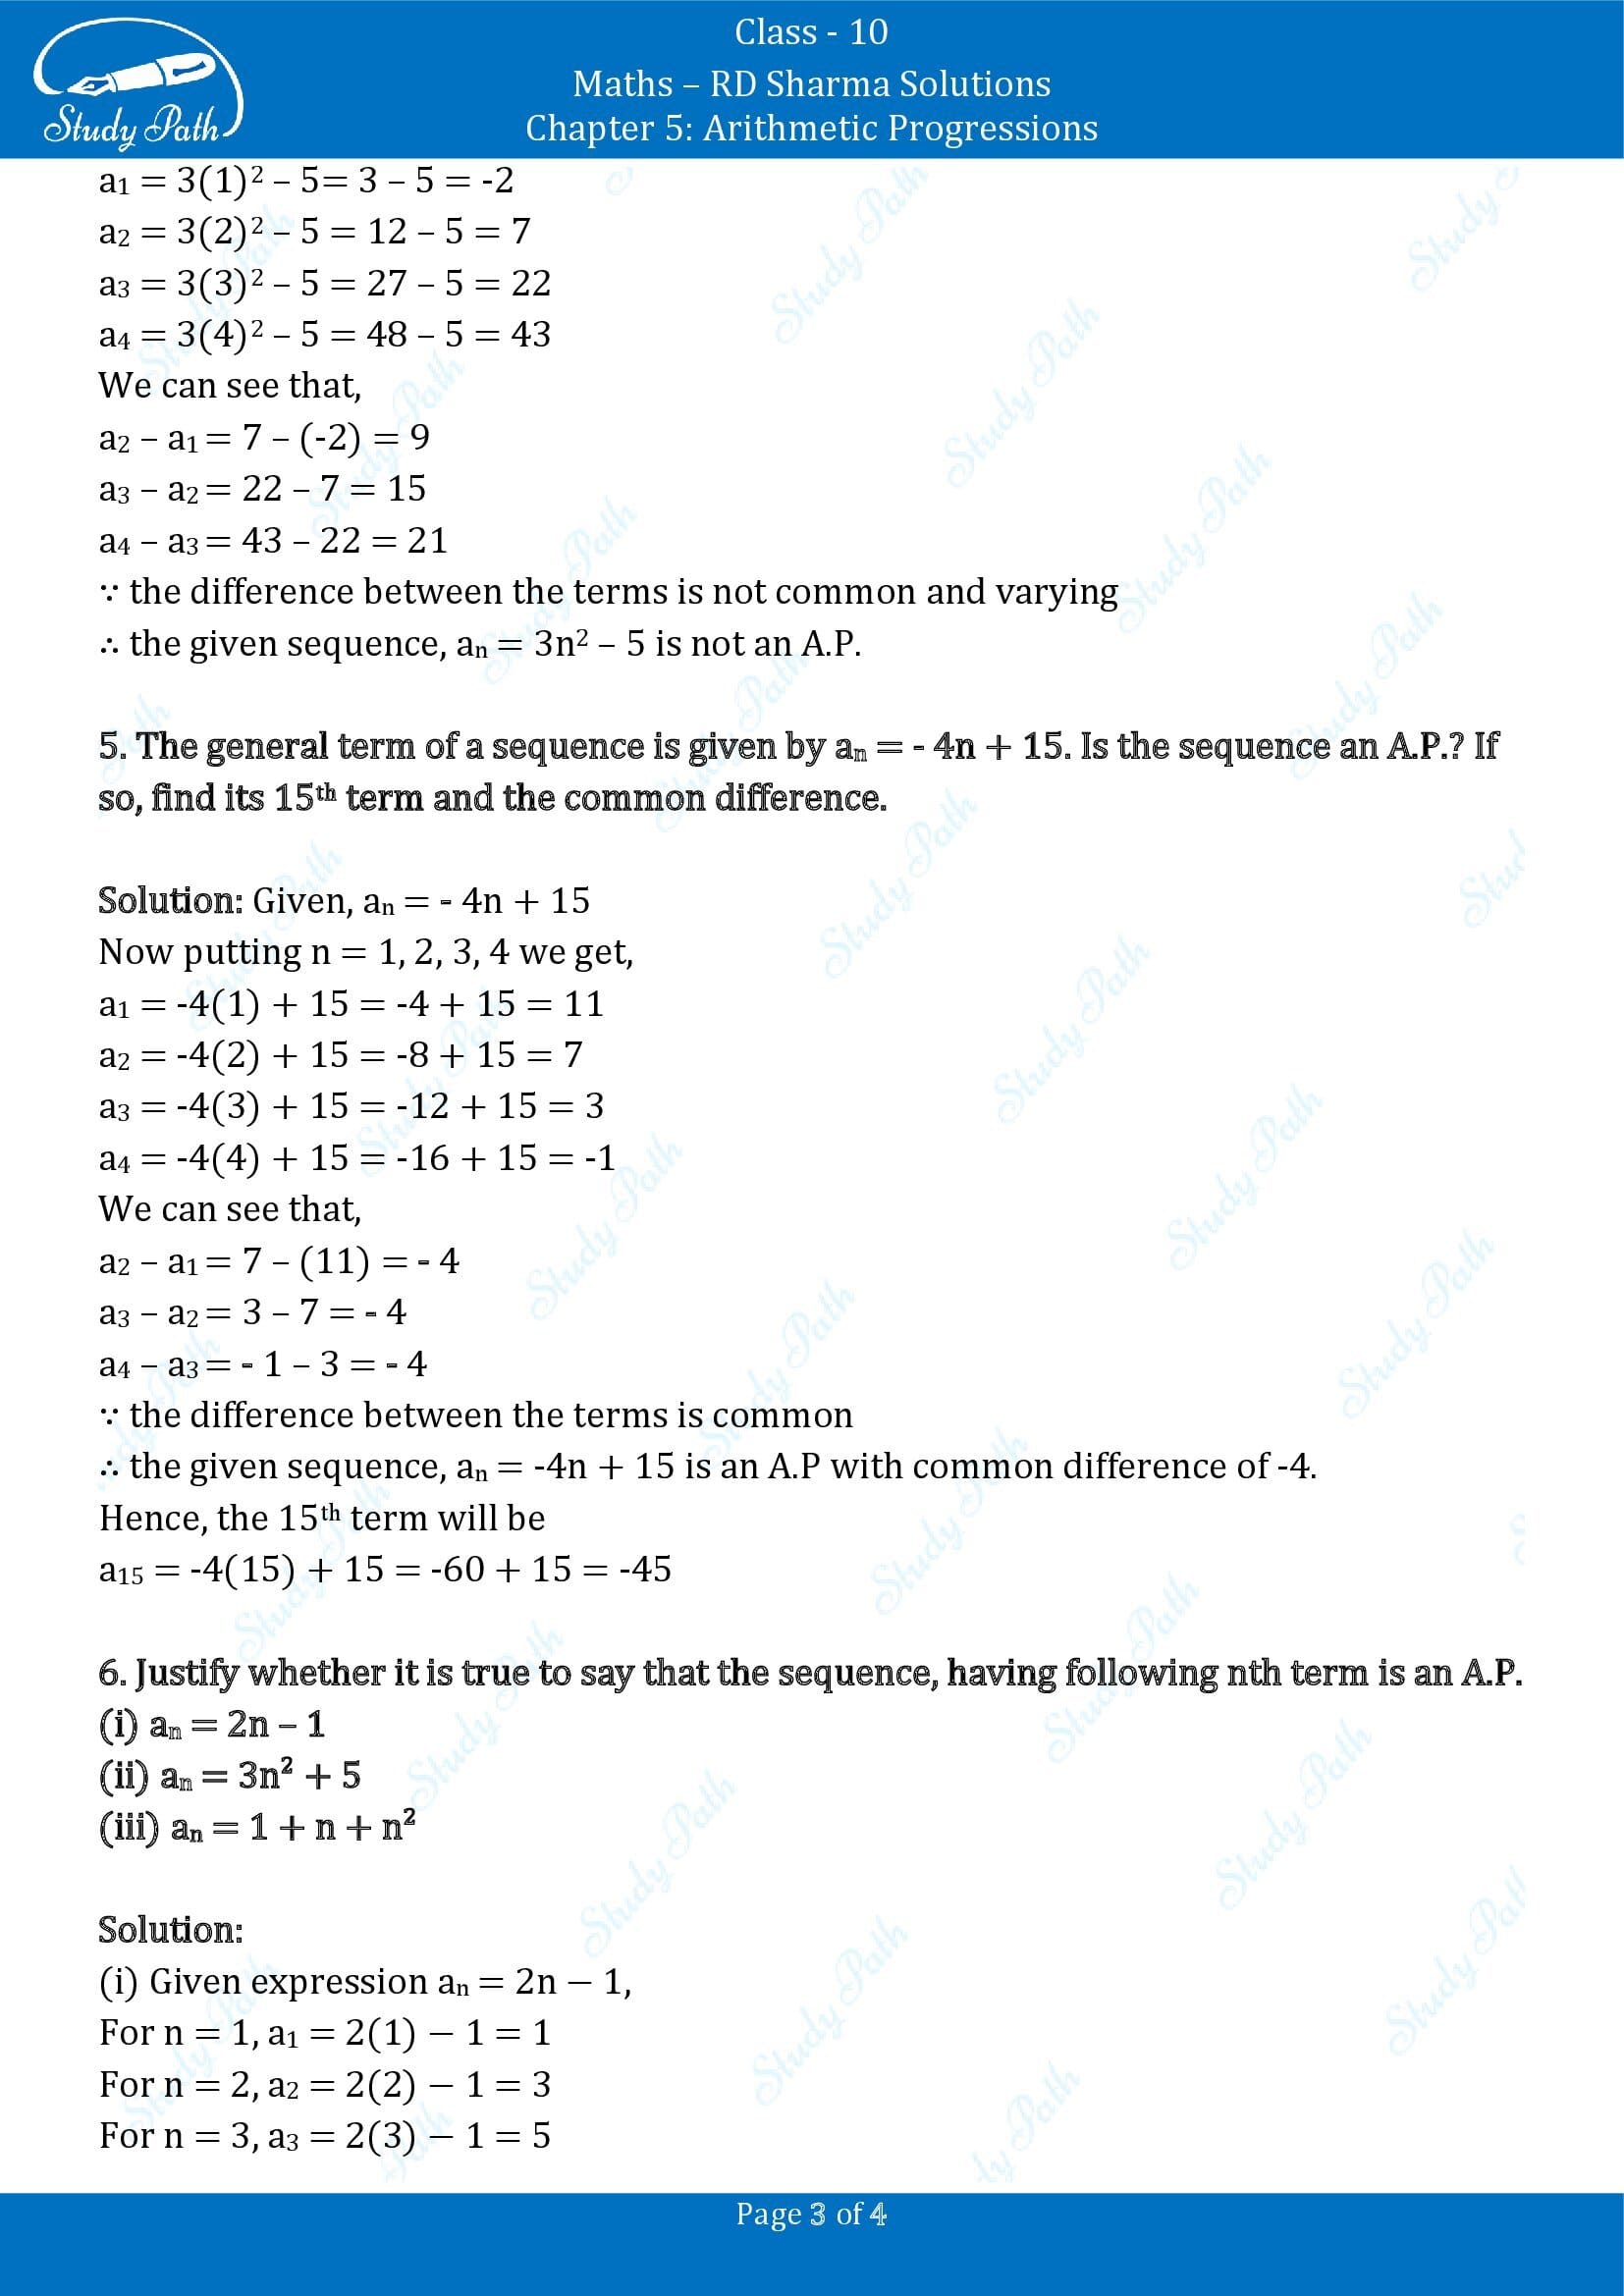 RD Sharma Solutions Class 10 Chapter 5 Arithmetic Progressions Exercise 5.2 00003